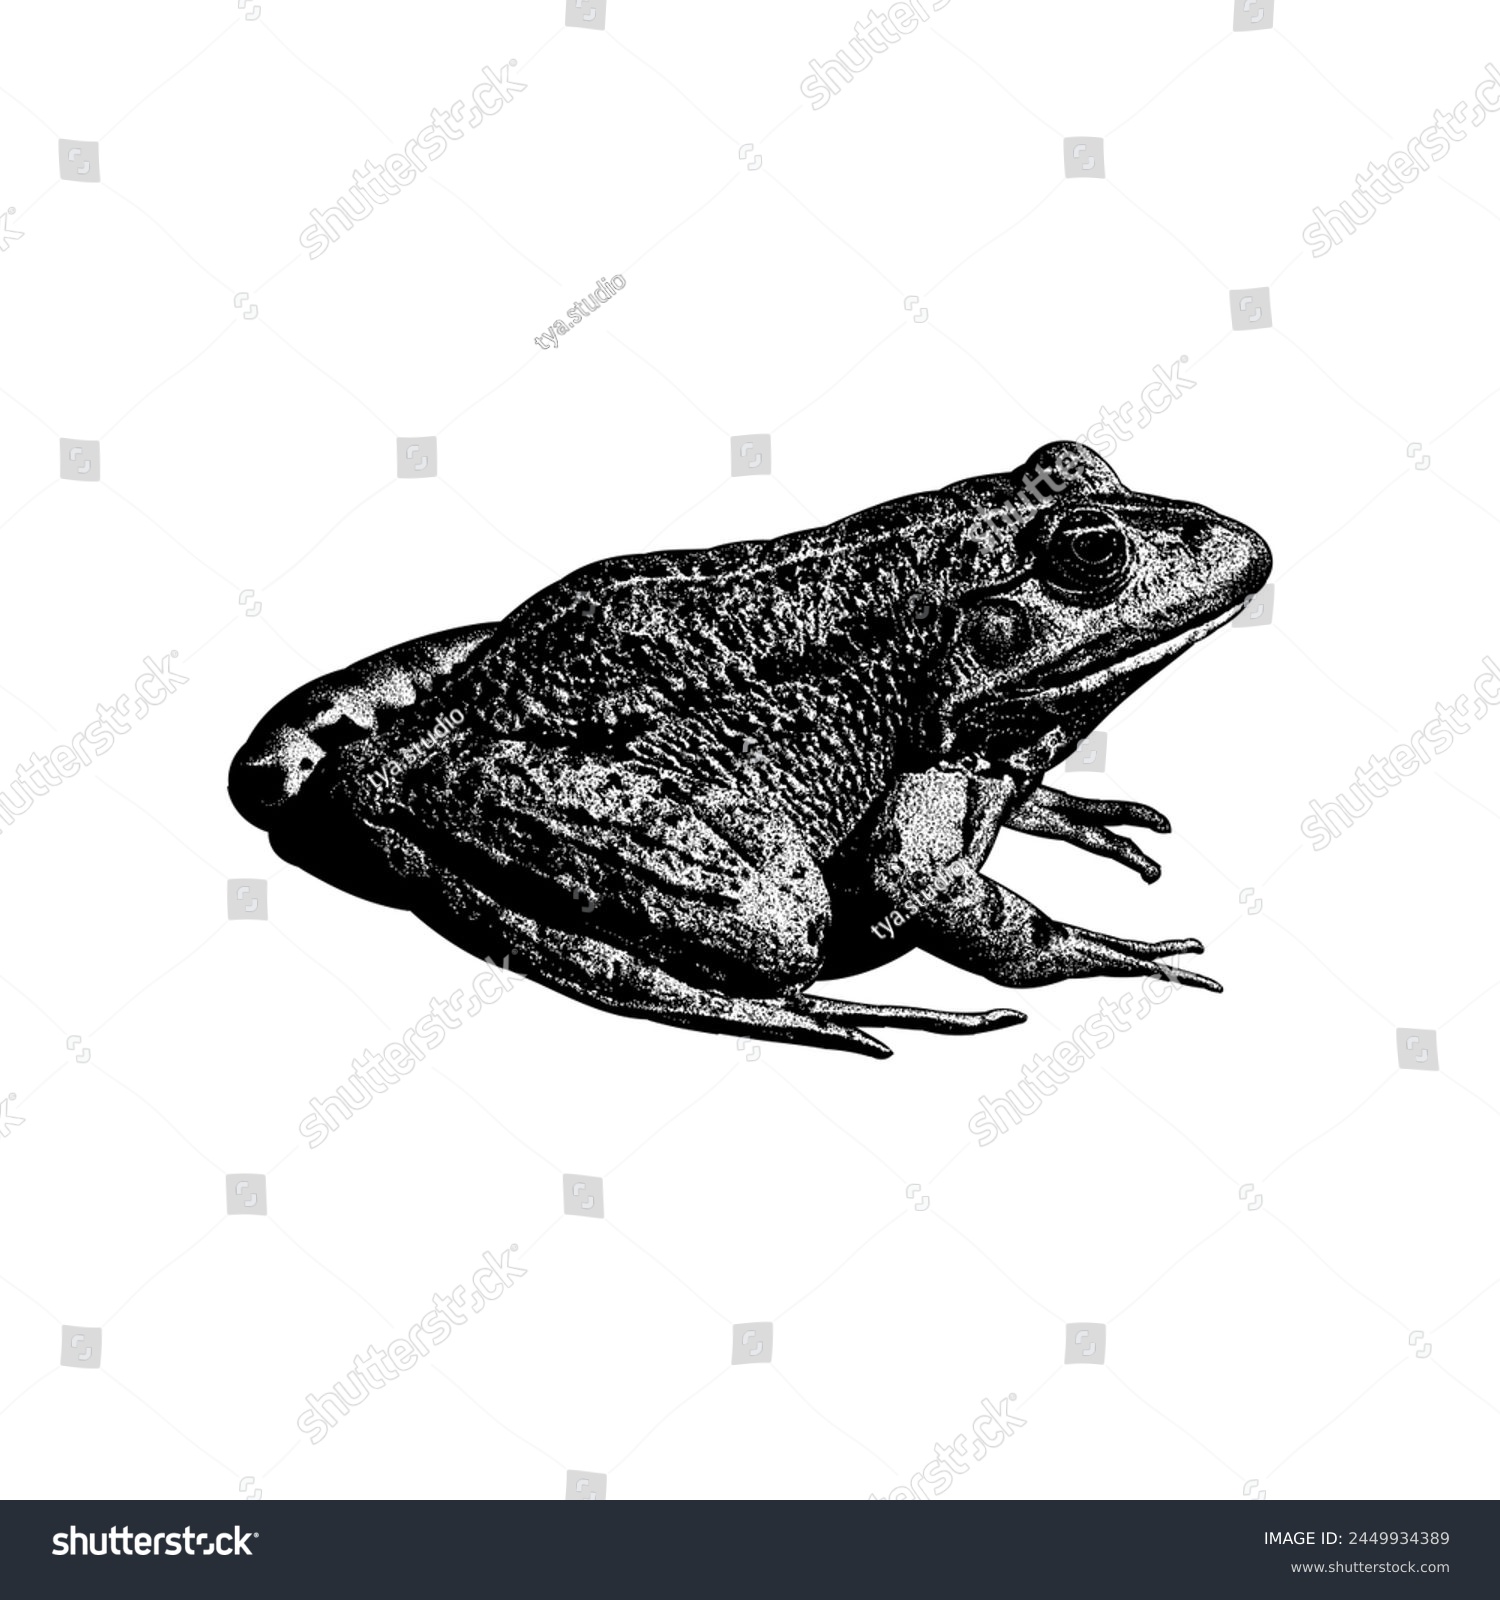 SVG of Marsh Frog hand drawing vector isolated on white background. svg